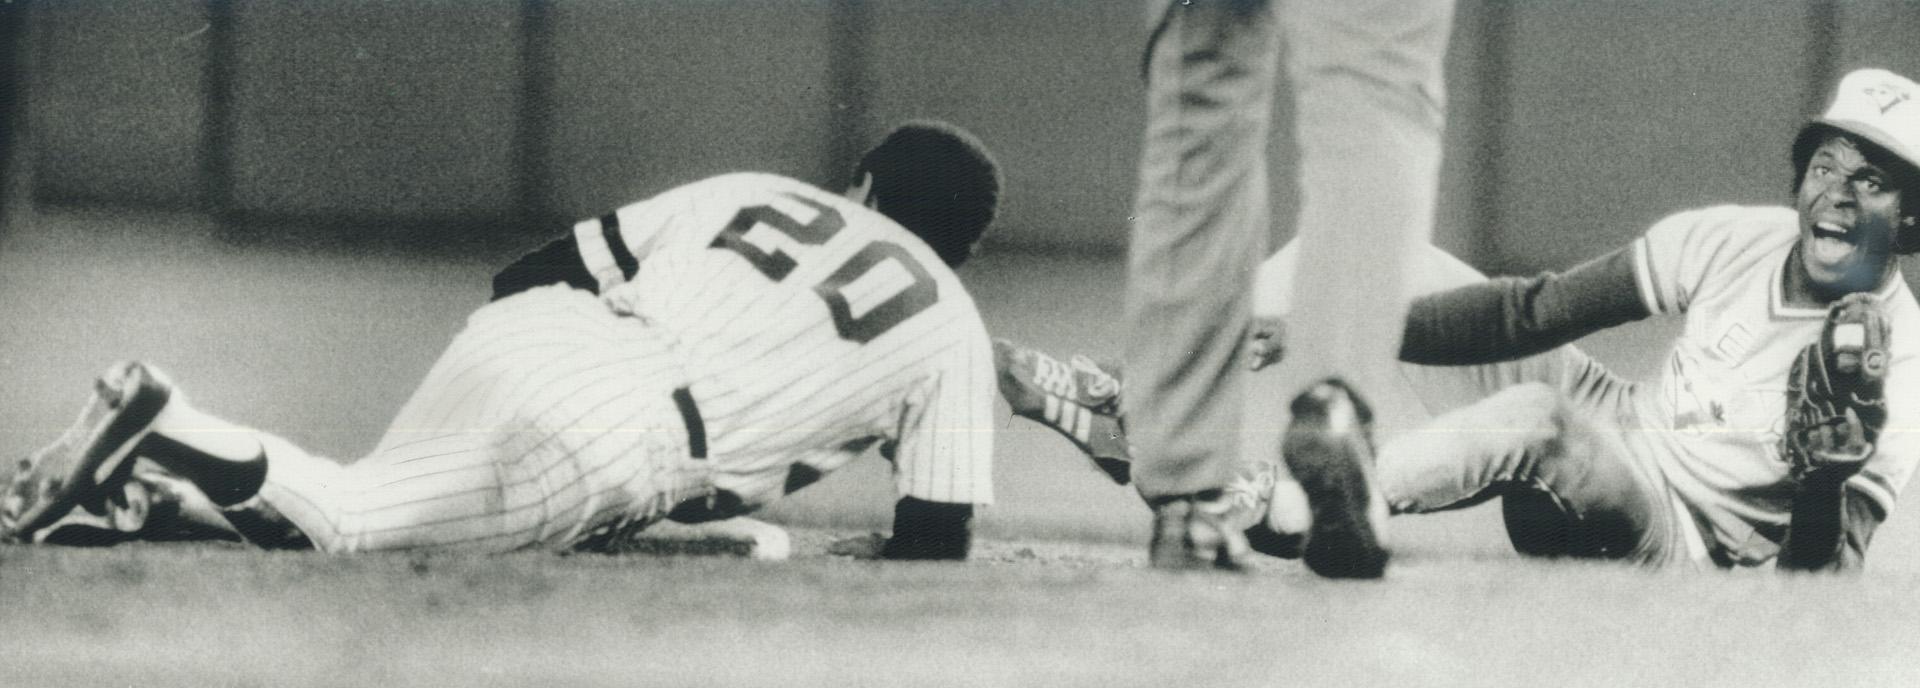 Got him! Jays shortstop Tony Fernandez shouts at the second base umpire, claiming that he tagged out New York's Bobby Meacham on a pick-off play in la(...)